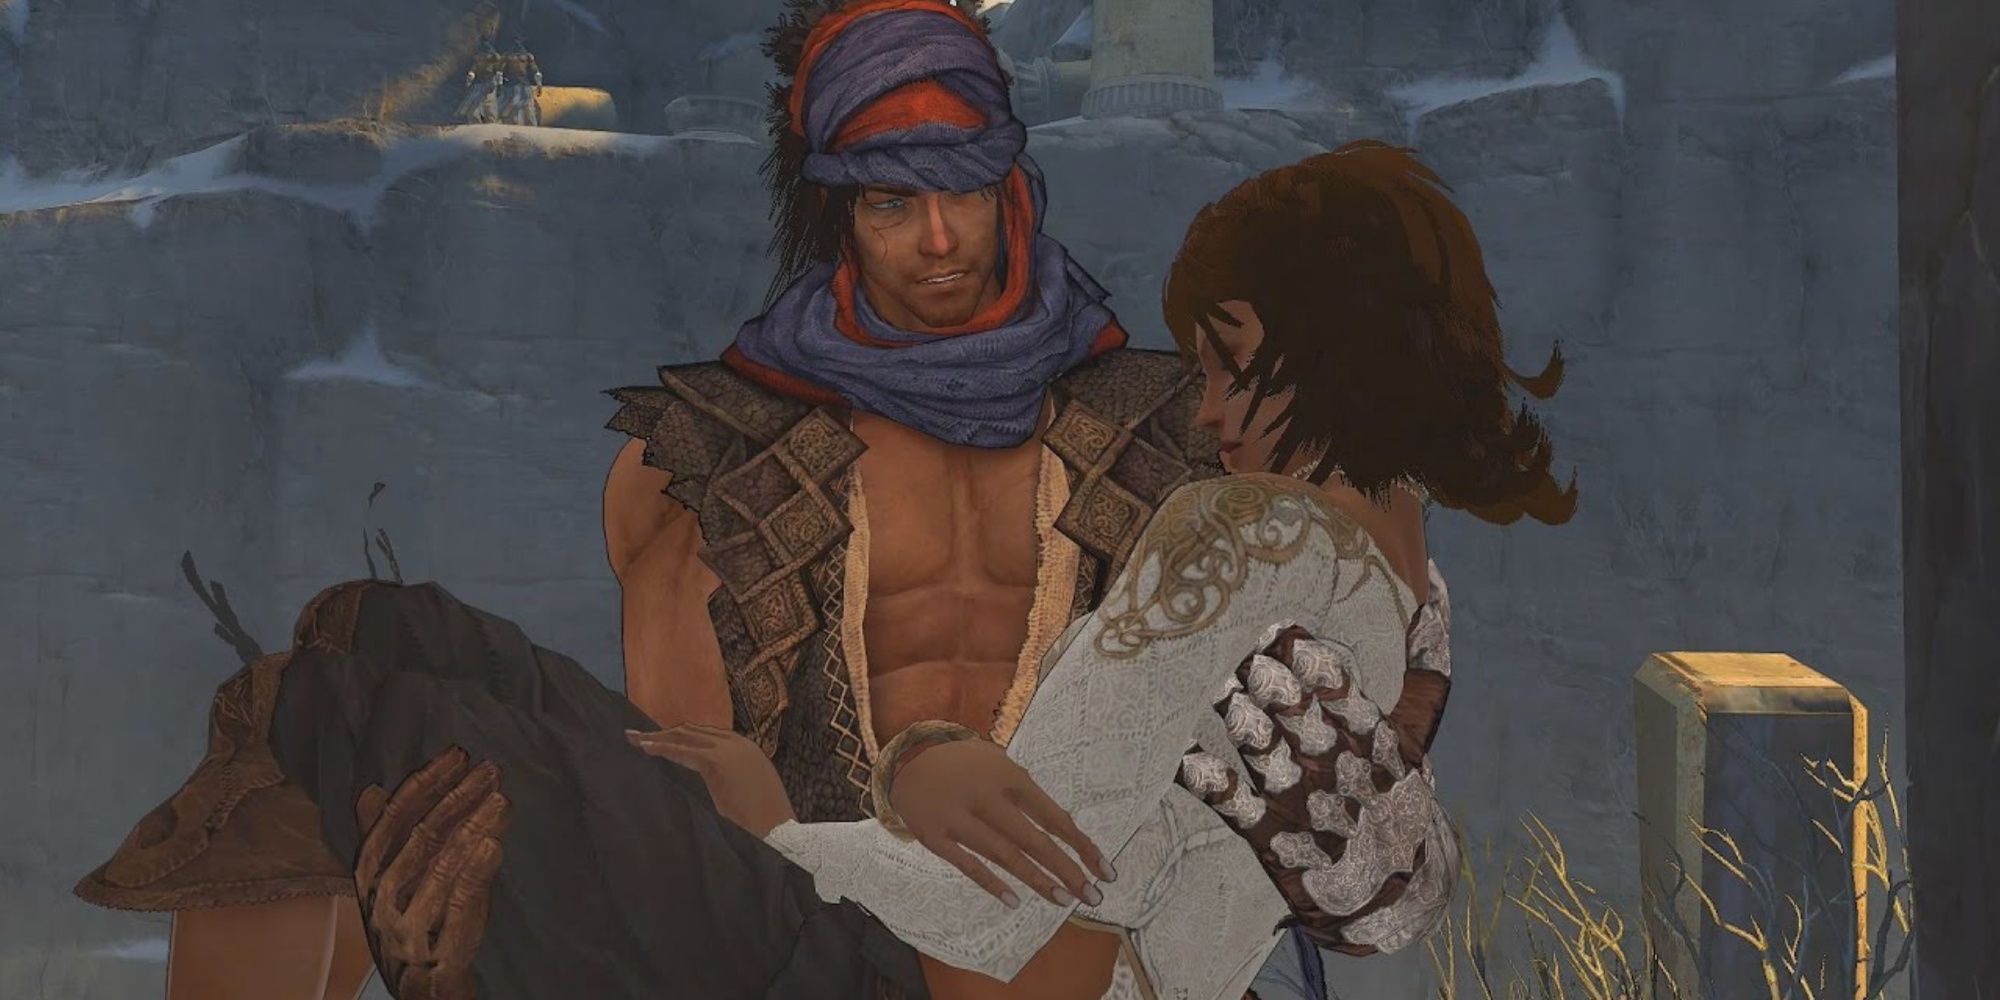 Prince and Erica from Prince of Persia (2008)